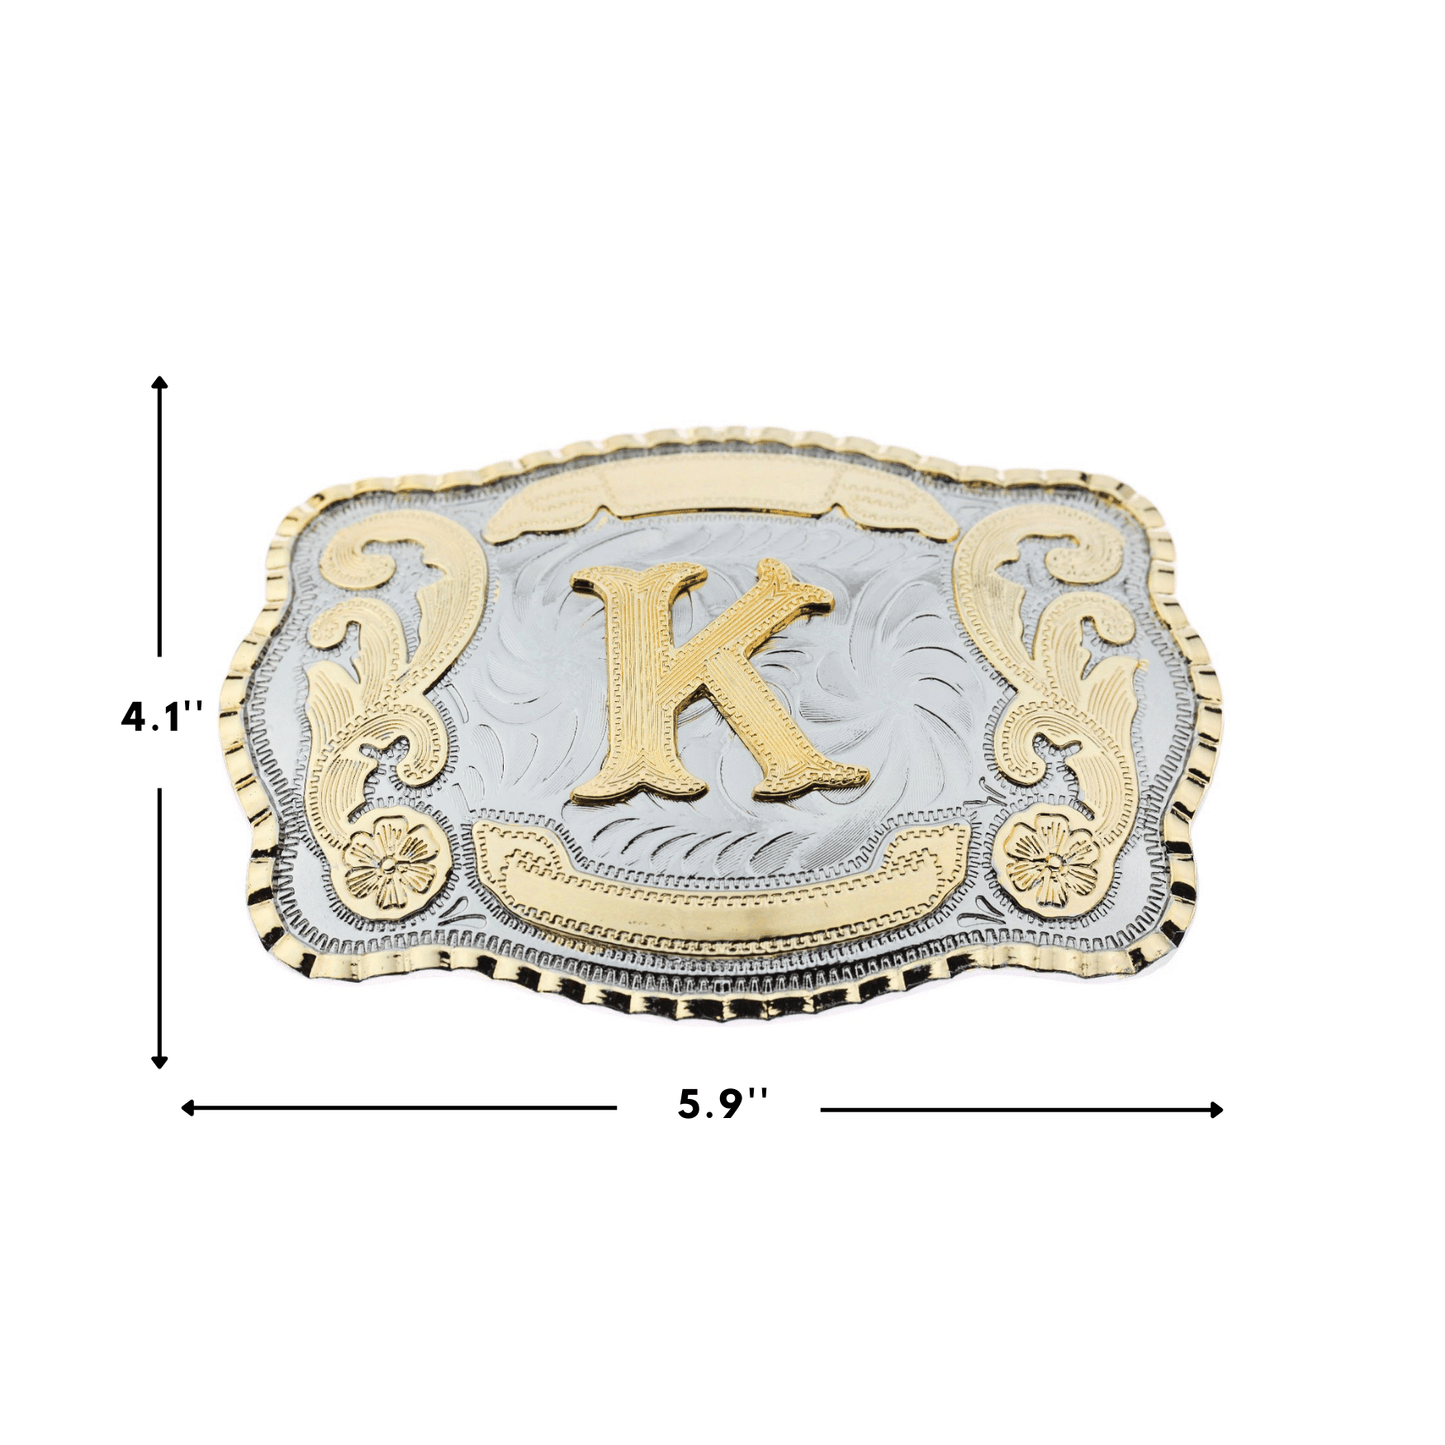 Initial Letter "K" Cowboy Rodeo Western Large Gold Tone Belt Buckle